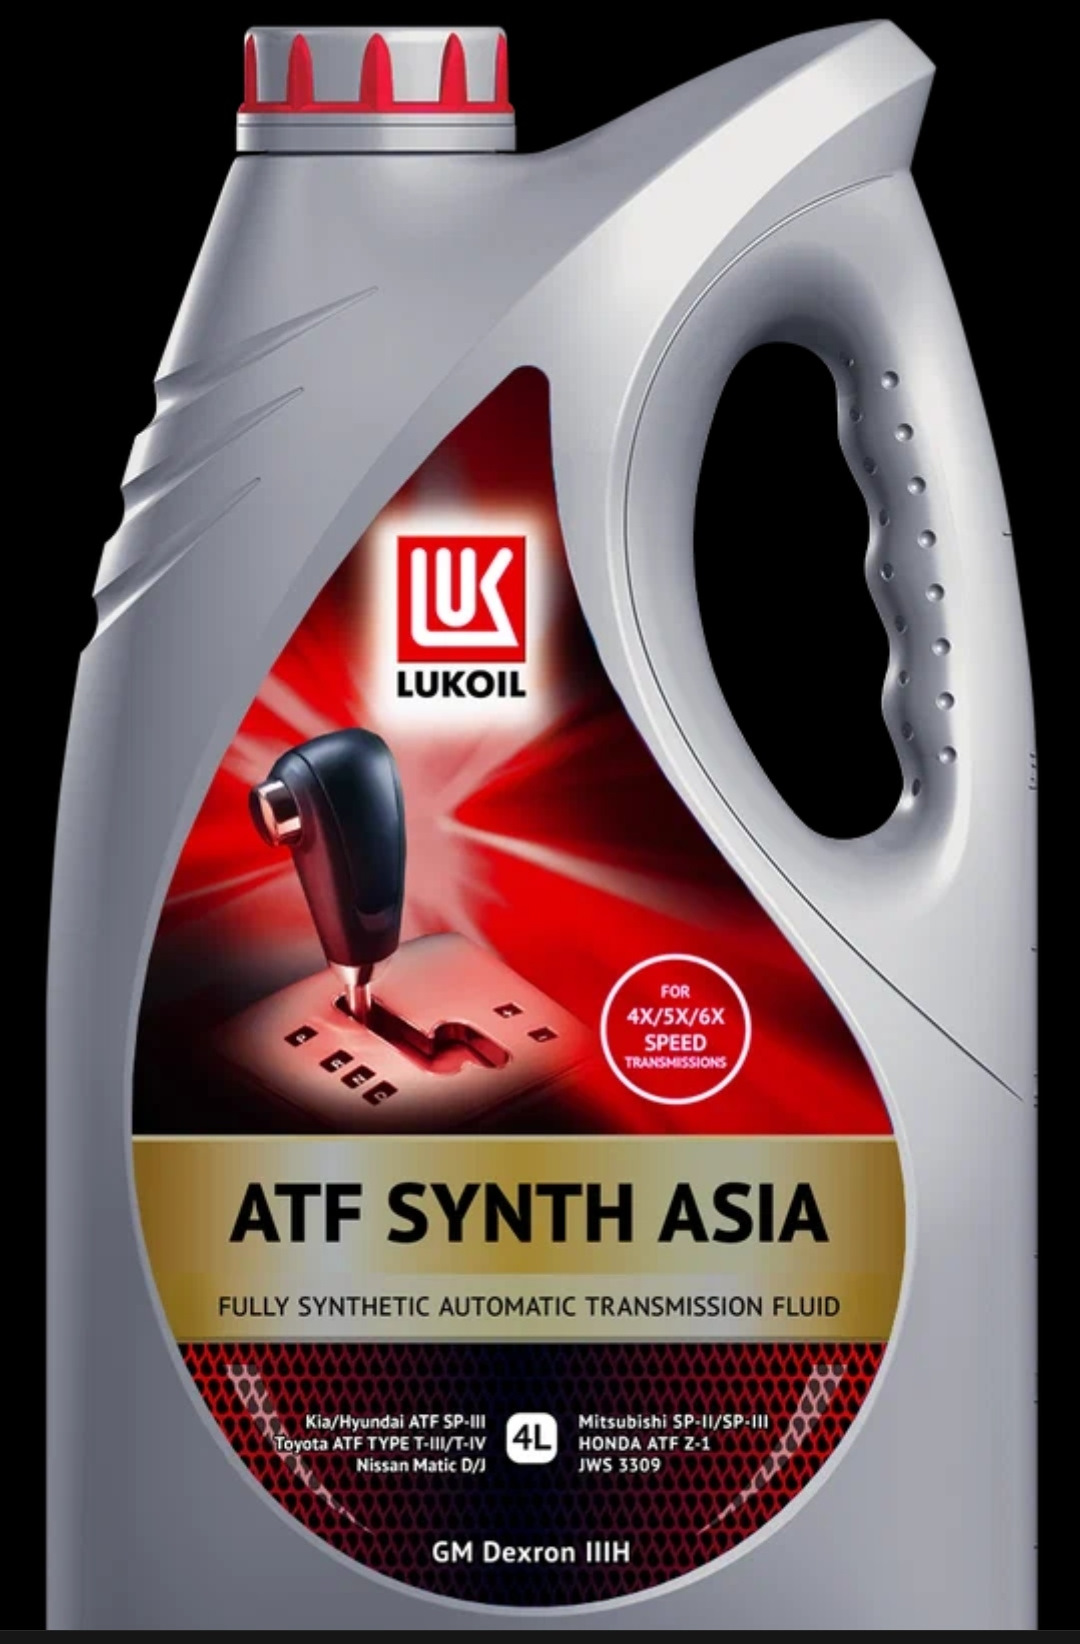 Atf synth vi. Lukoil ATF Synth Asia. Лукойл ATF Synth Multi. Лукойл ATF Synth vi. ATF Synth Asia 4л (авт. Транс. Синт. Масло), 3132621, Лукойл.